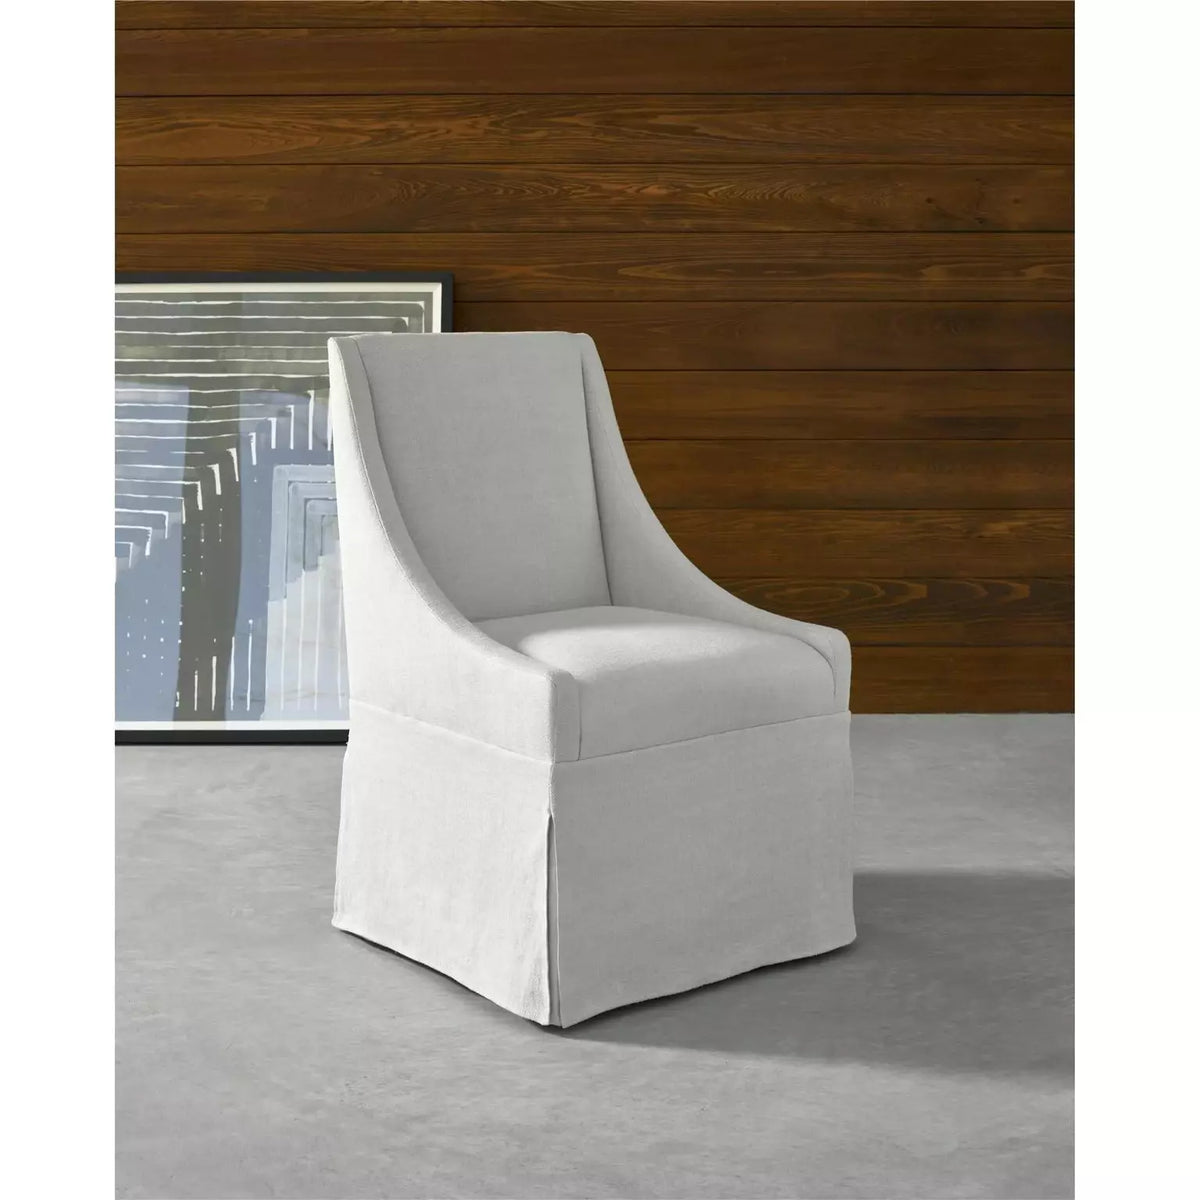 Townsend Castered Dining Chair White - Be Bold Furniture